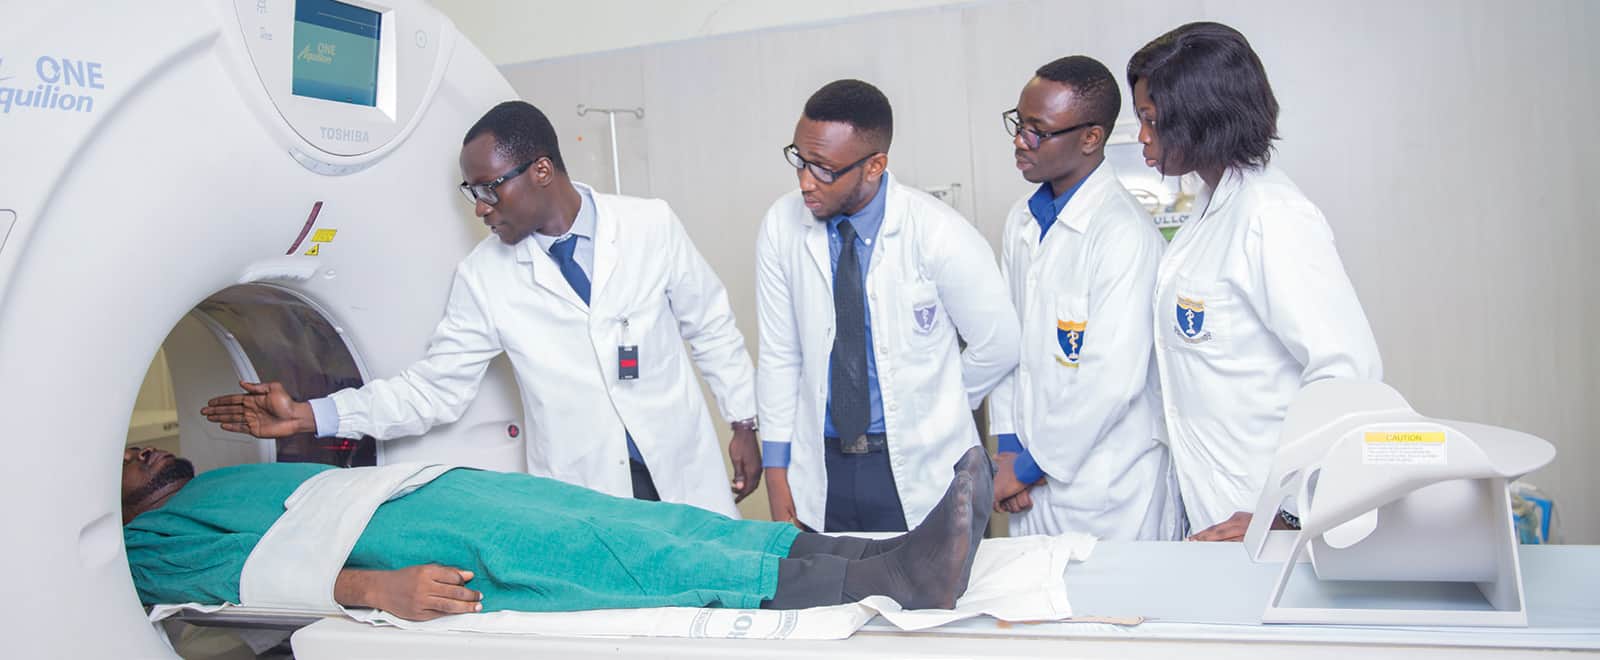 University of Ghana Medical School Admission Requirements